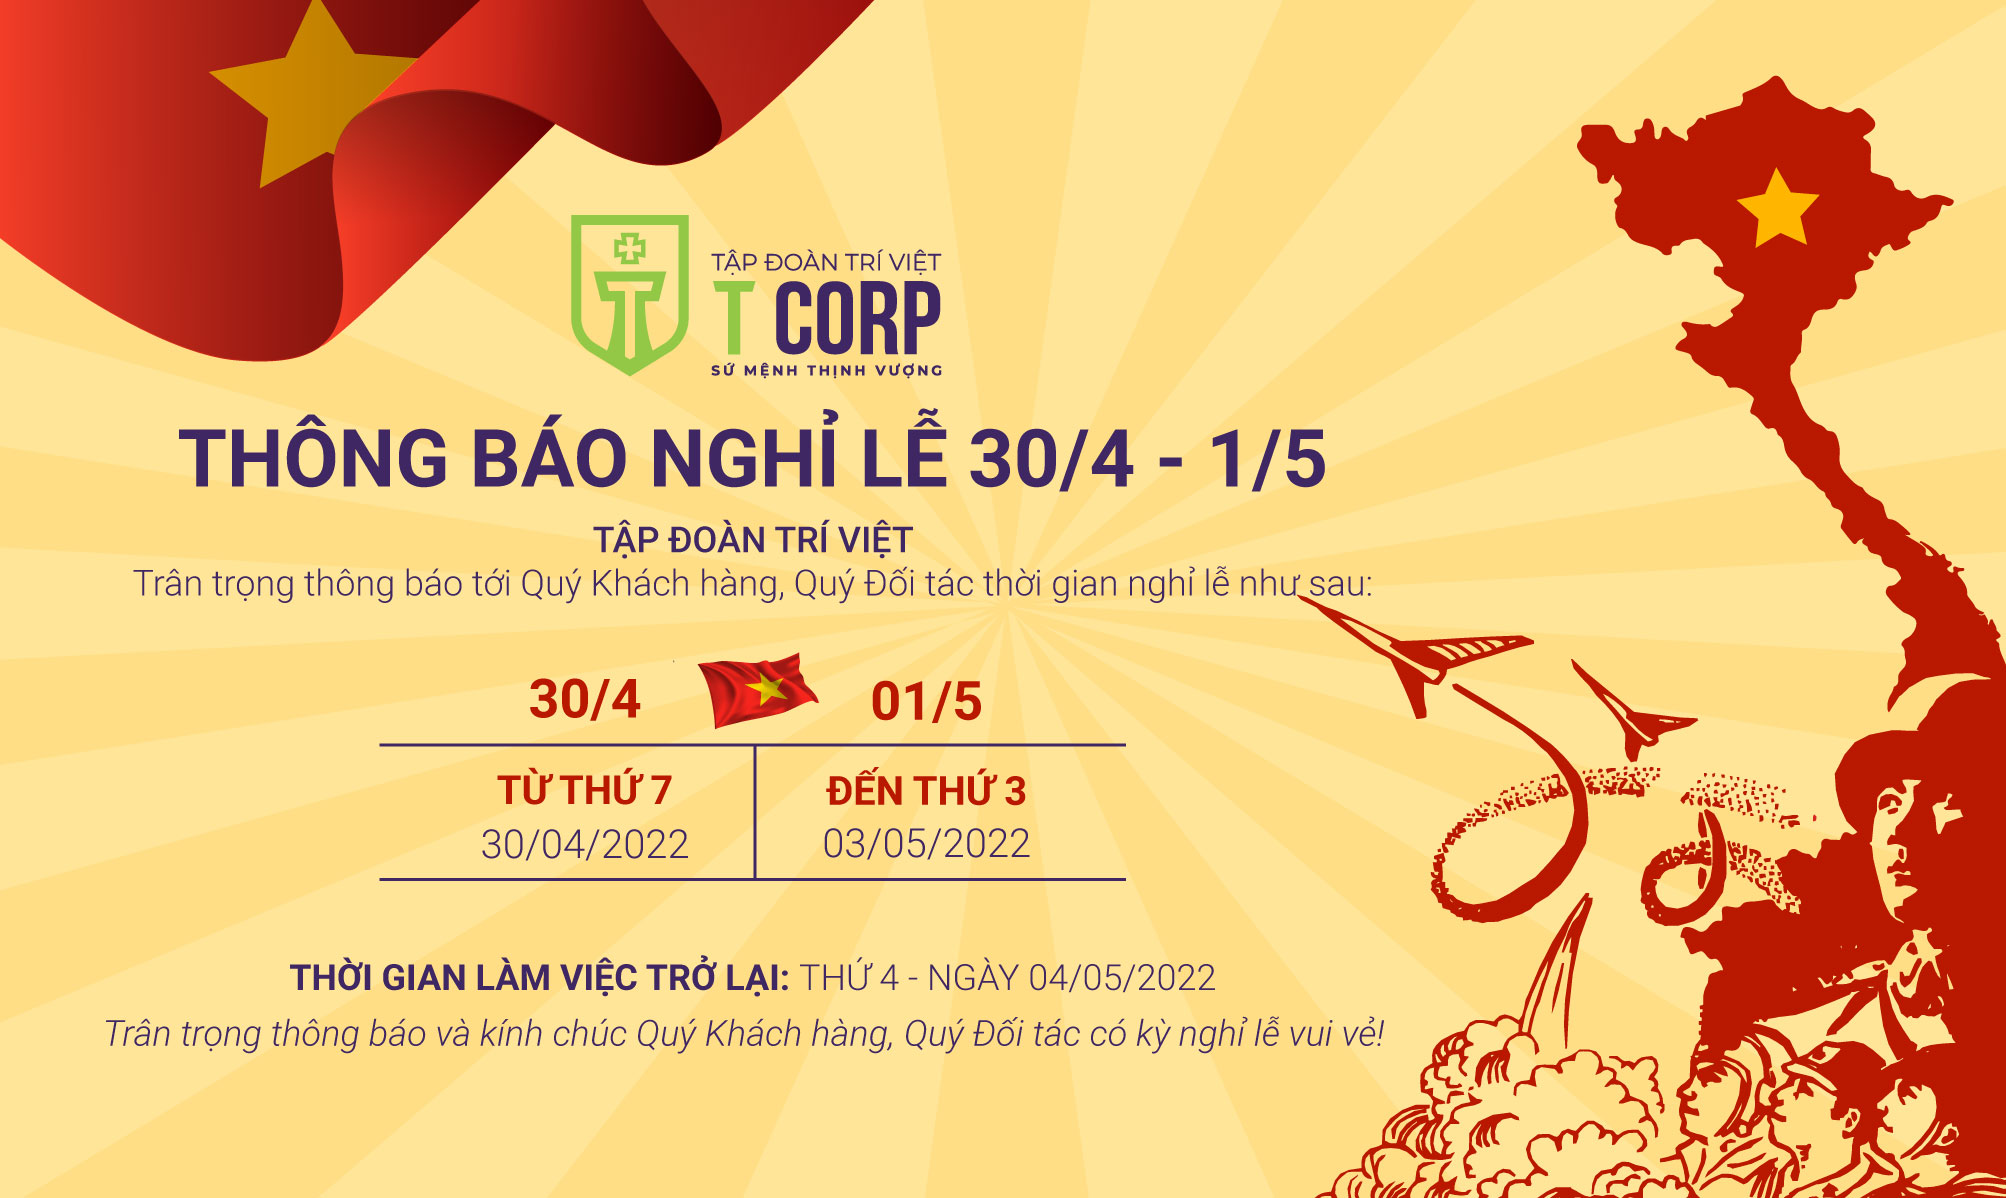 Lịch-nghỉ-tvc-KH